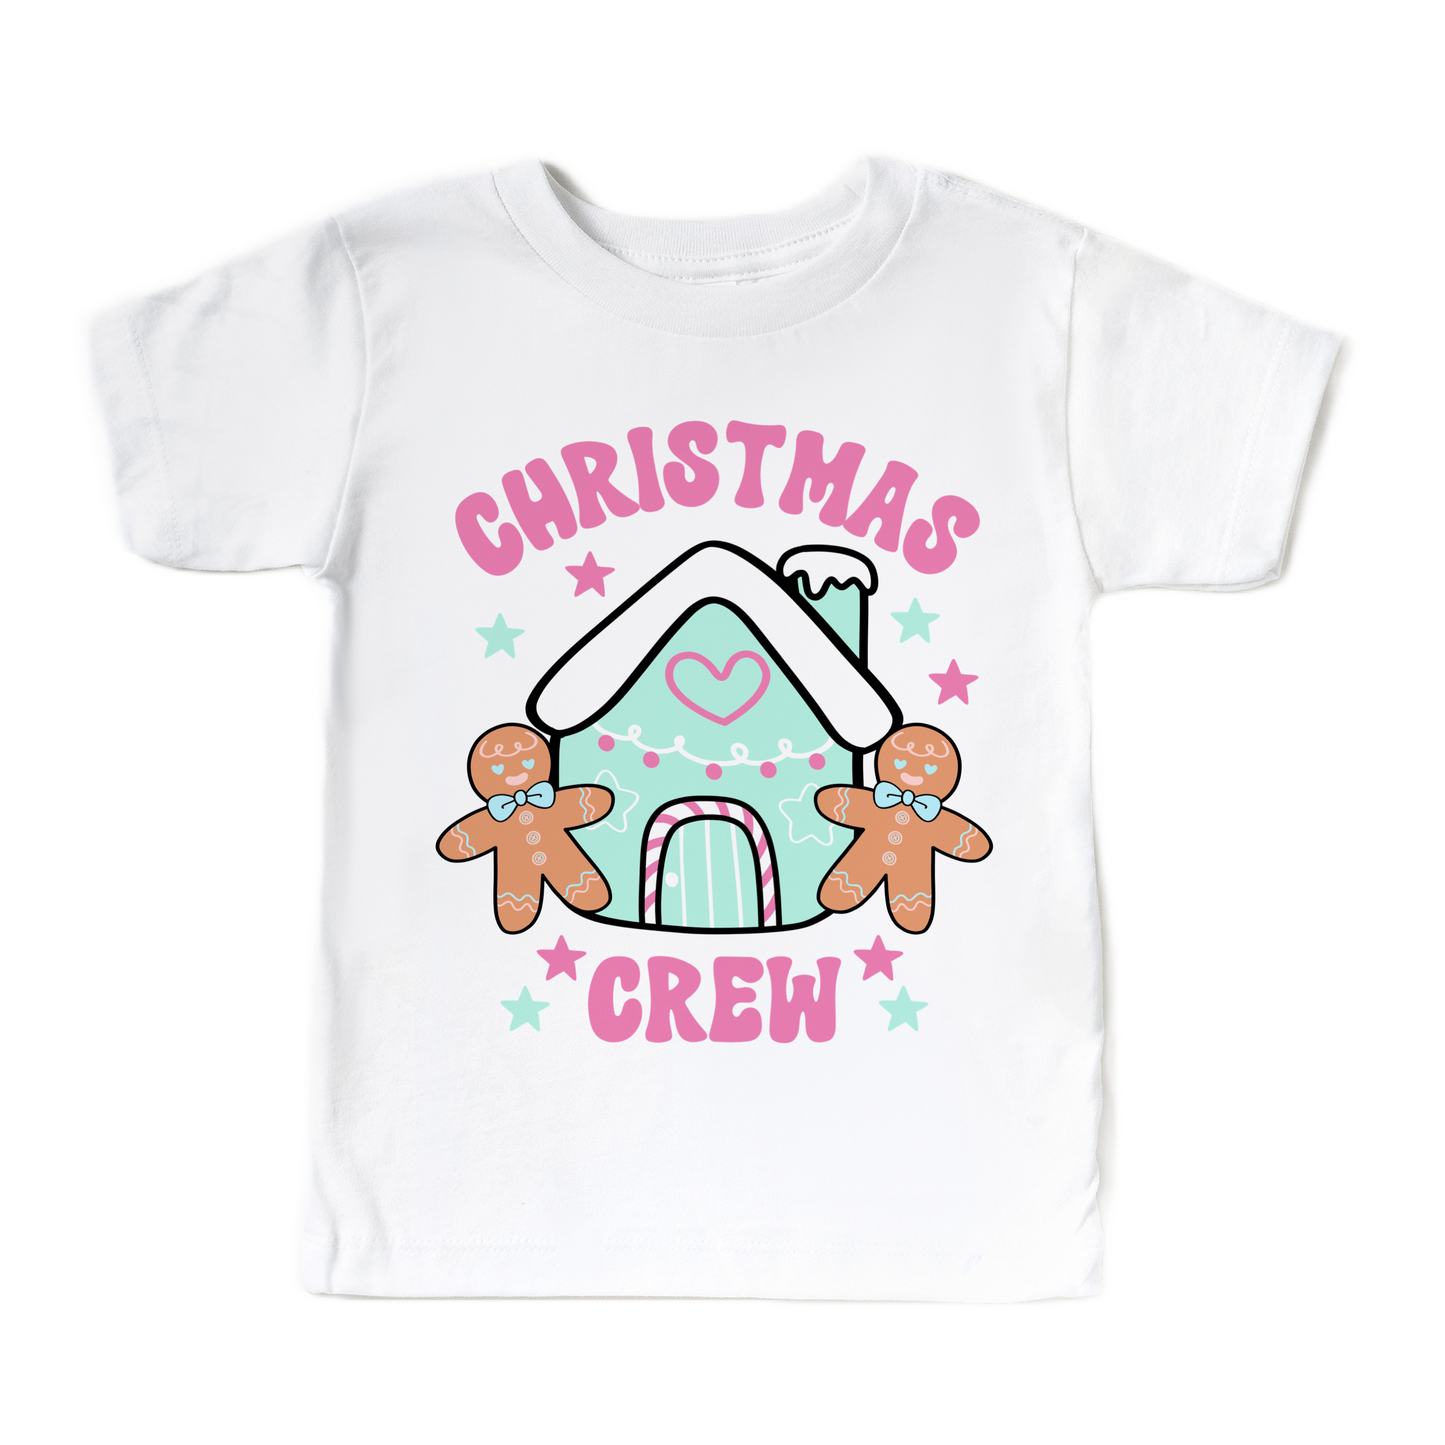 Christmas Crew White T-Shirt with Blue House Kids Girls Boys